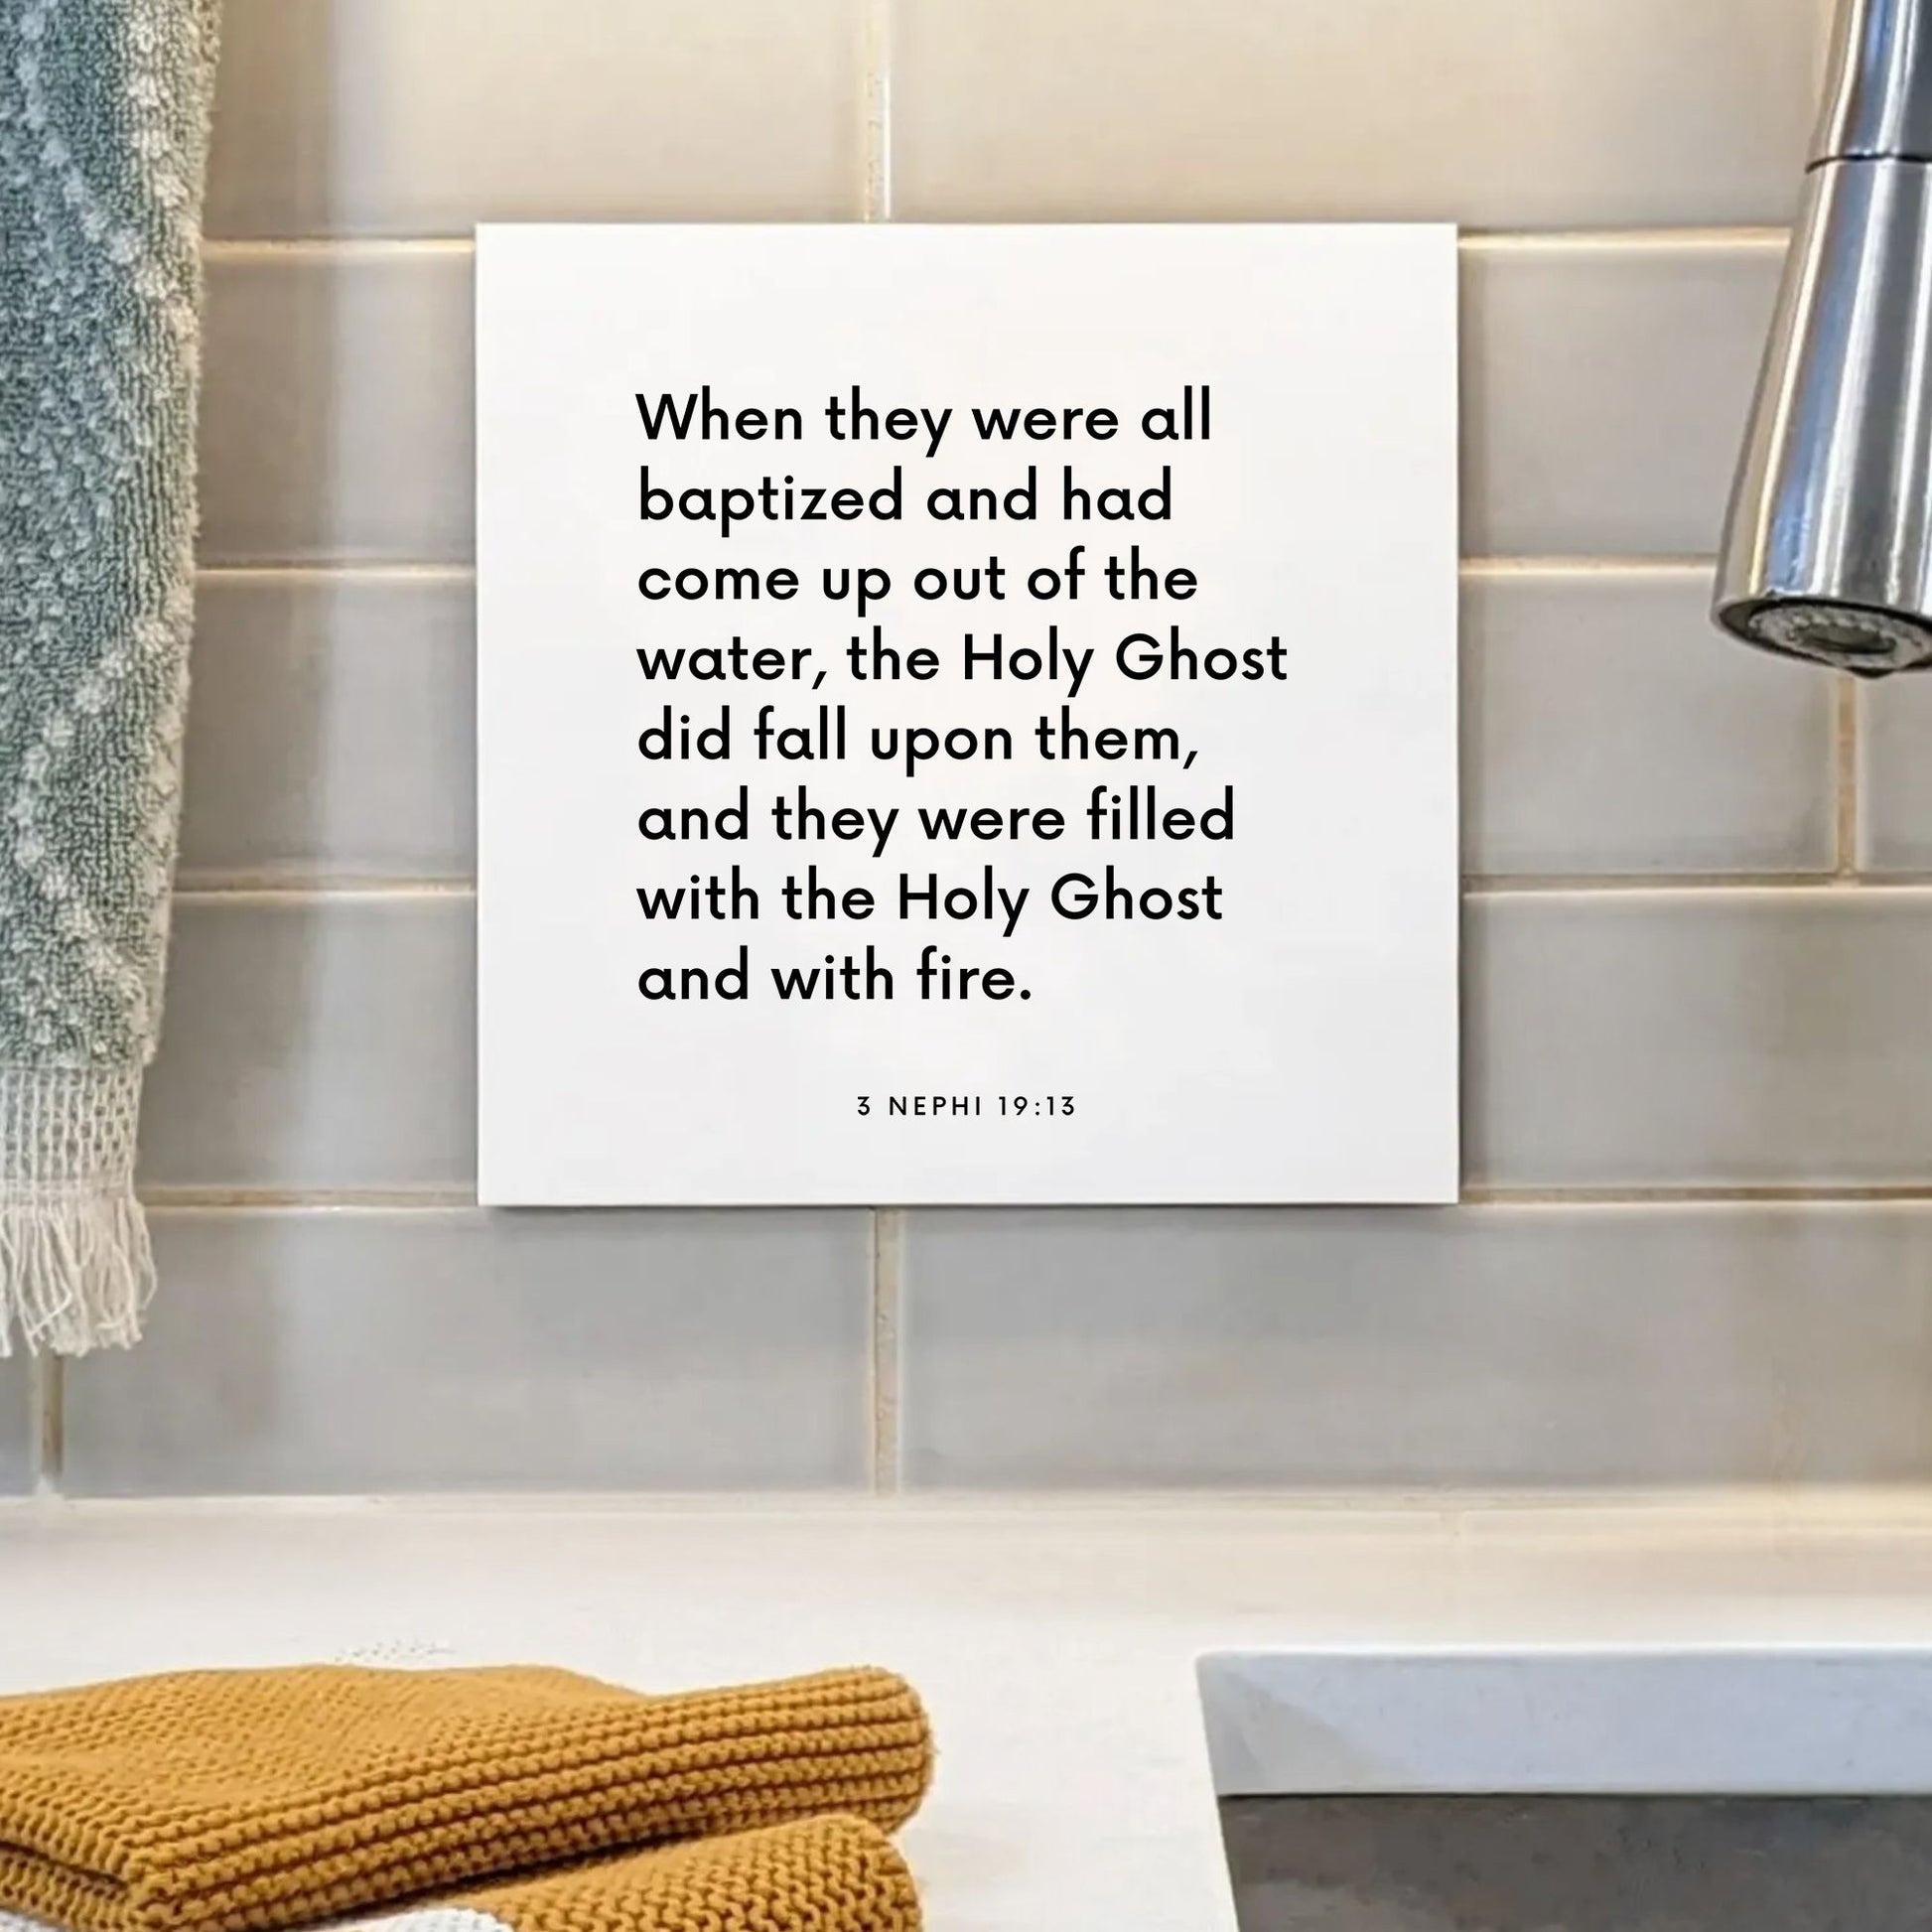 Sink mouting of the scripture tile for 3 Nephi 19:13 - "They were filled with the Holy Ghost and with fire"